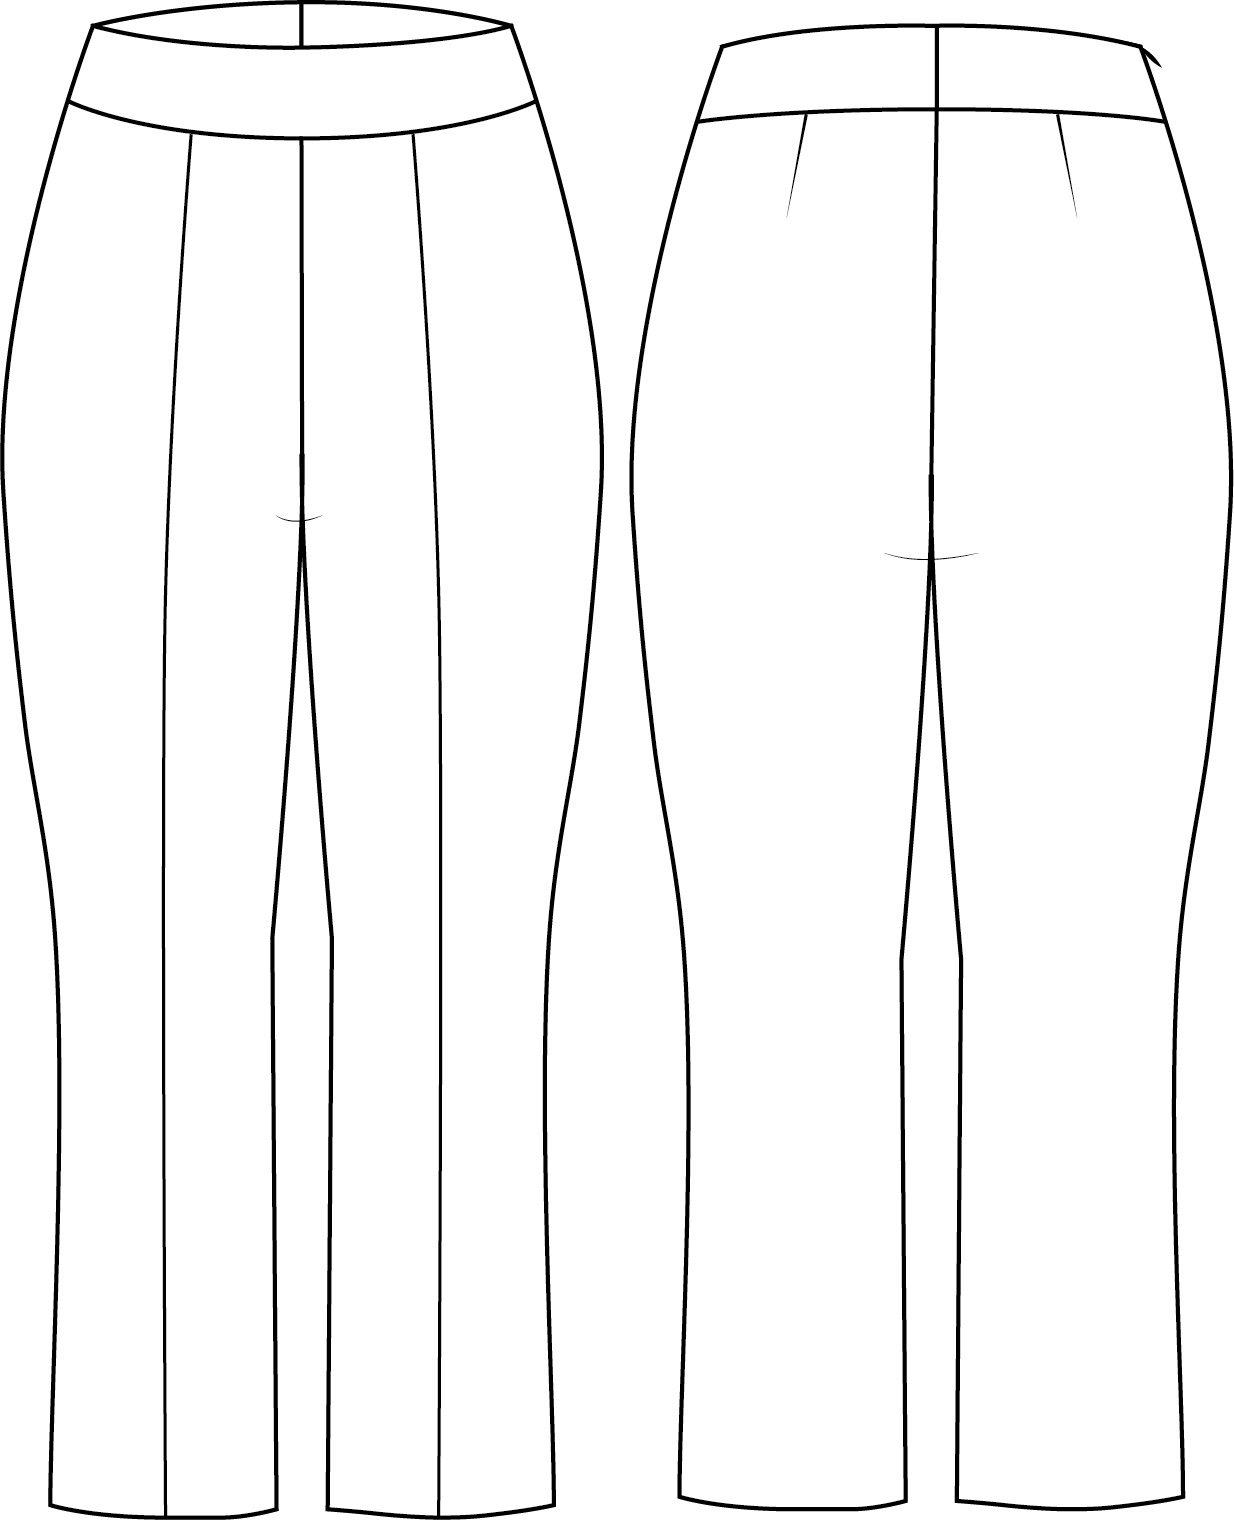 How to Do Fashion No. 28 Hanover Trousers - The Fold Line